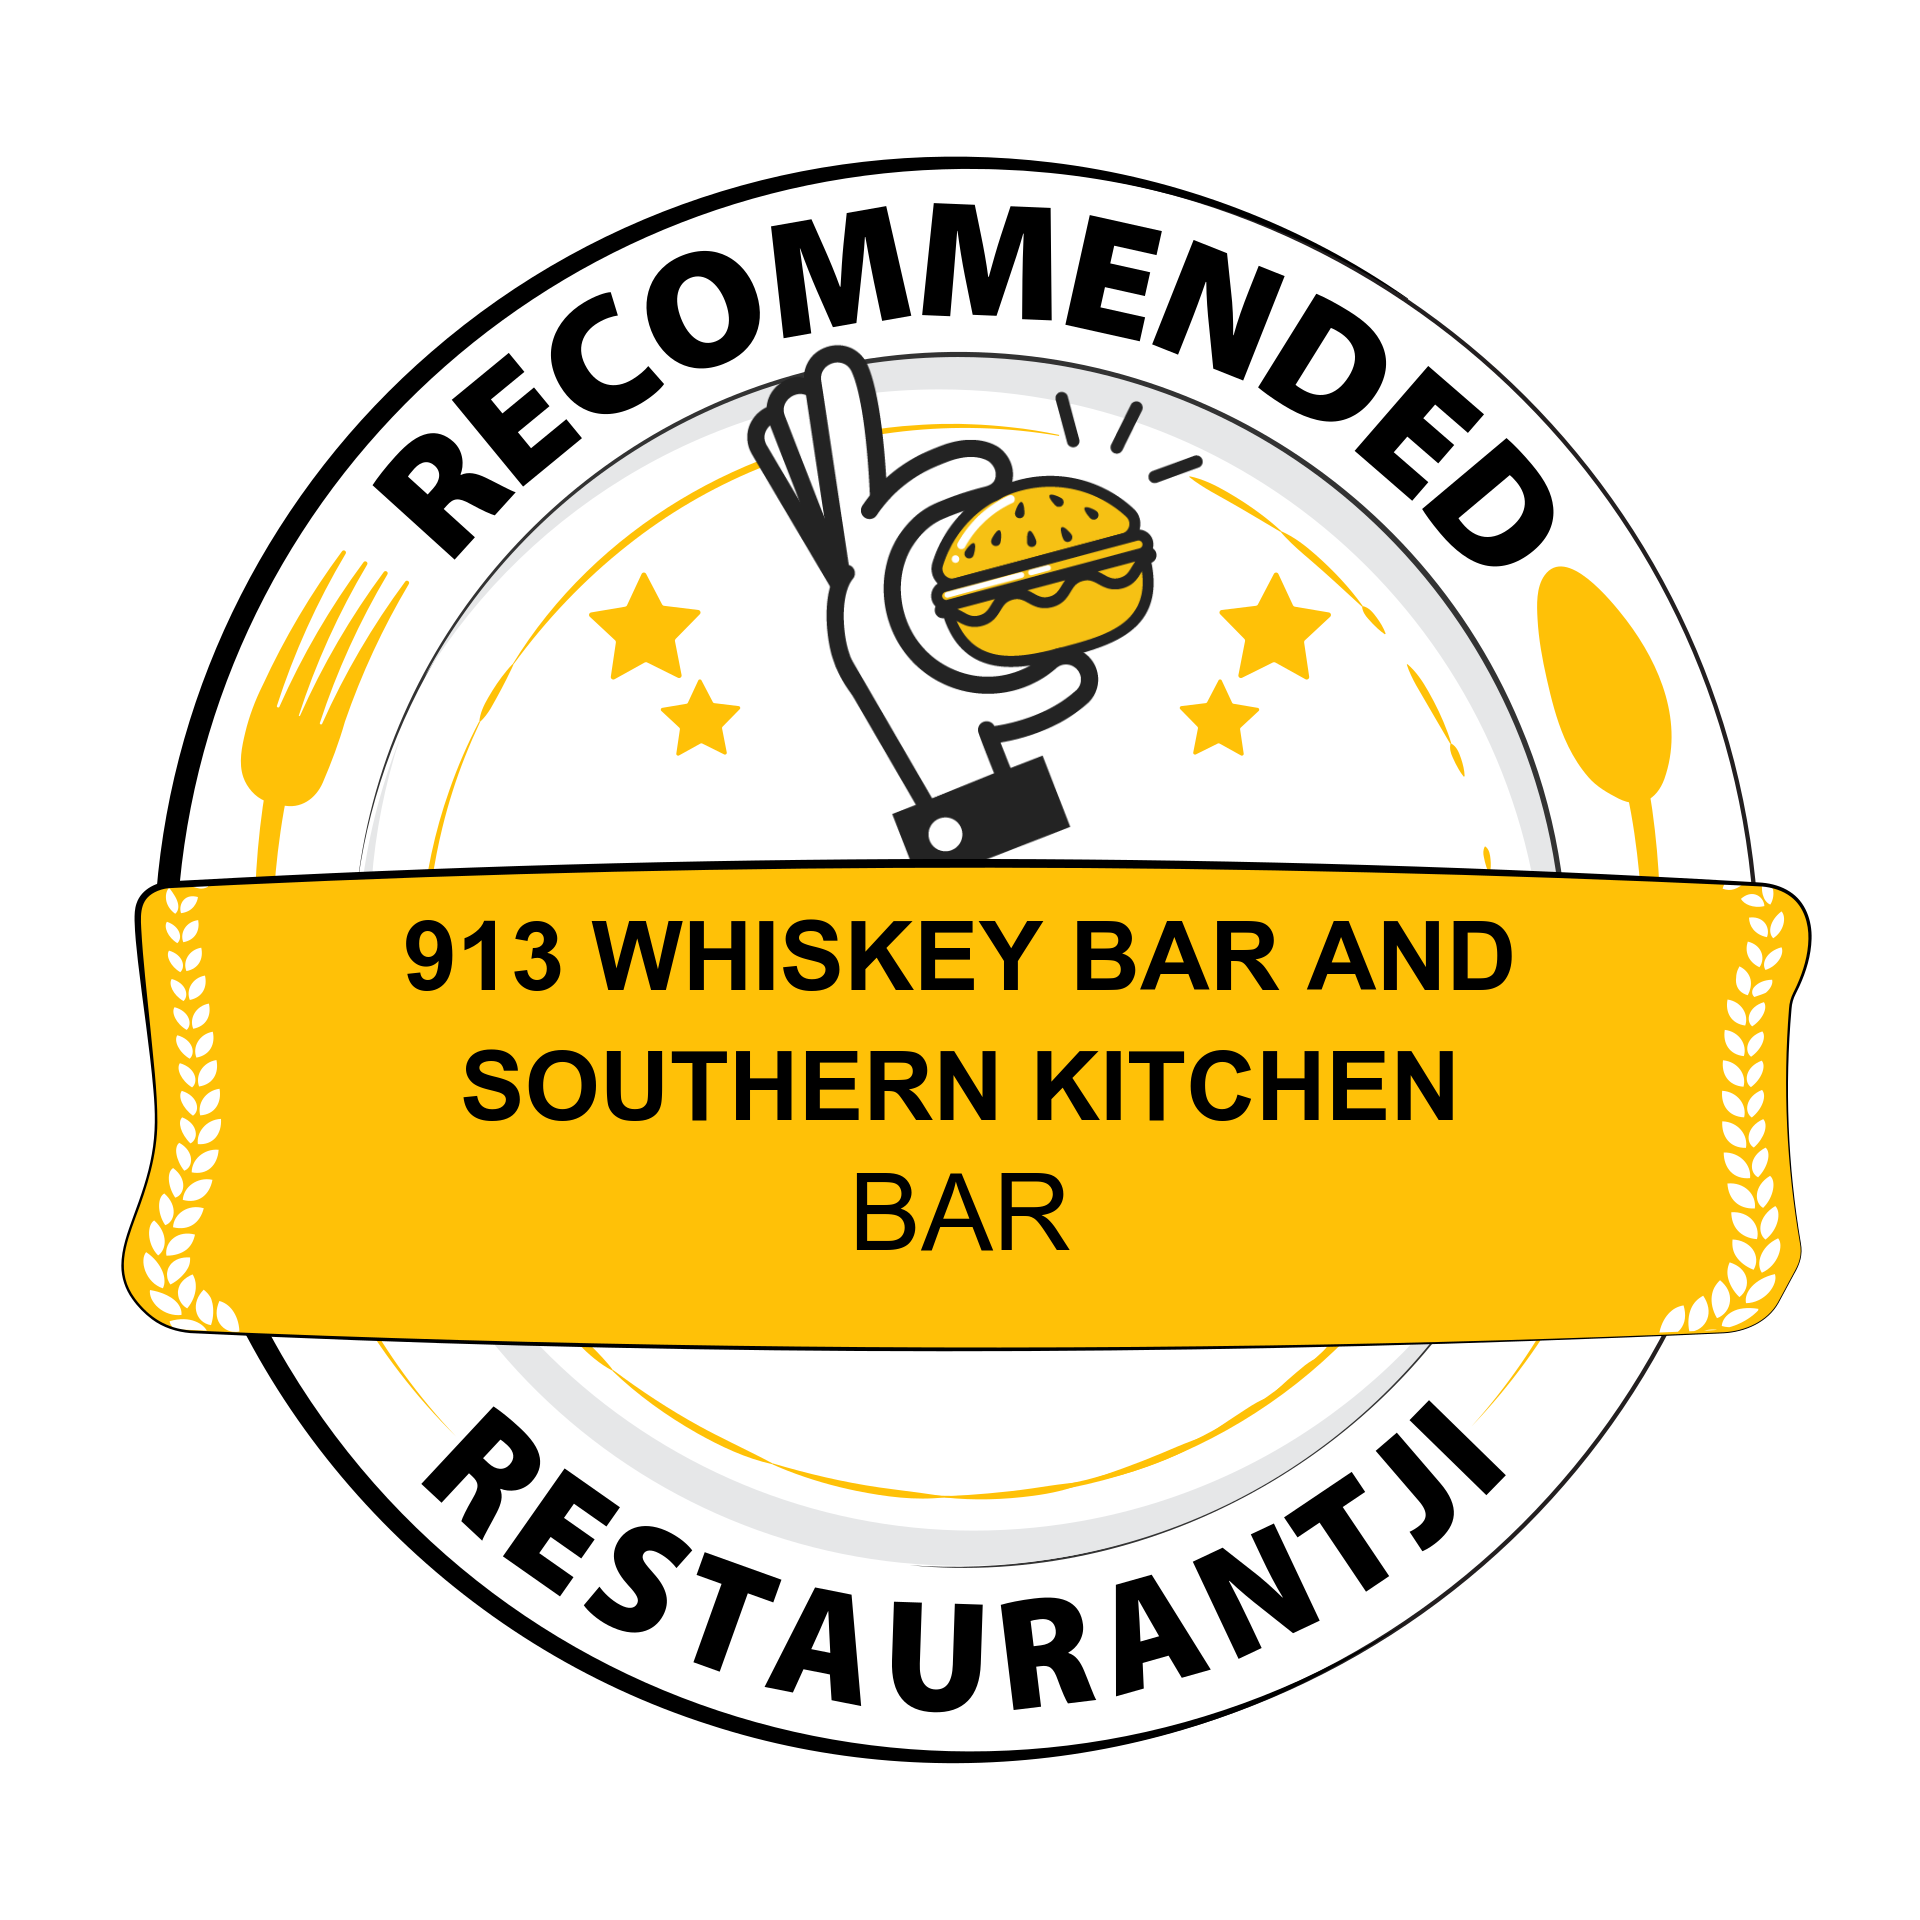 913 Whiskey Bar And Southern Kitchen is celebrated on Restaurantji - an ultimate directory with restaurant reviews, menus and photos.